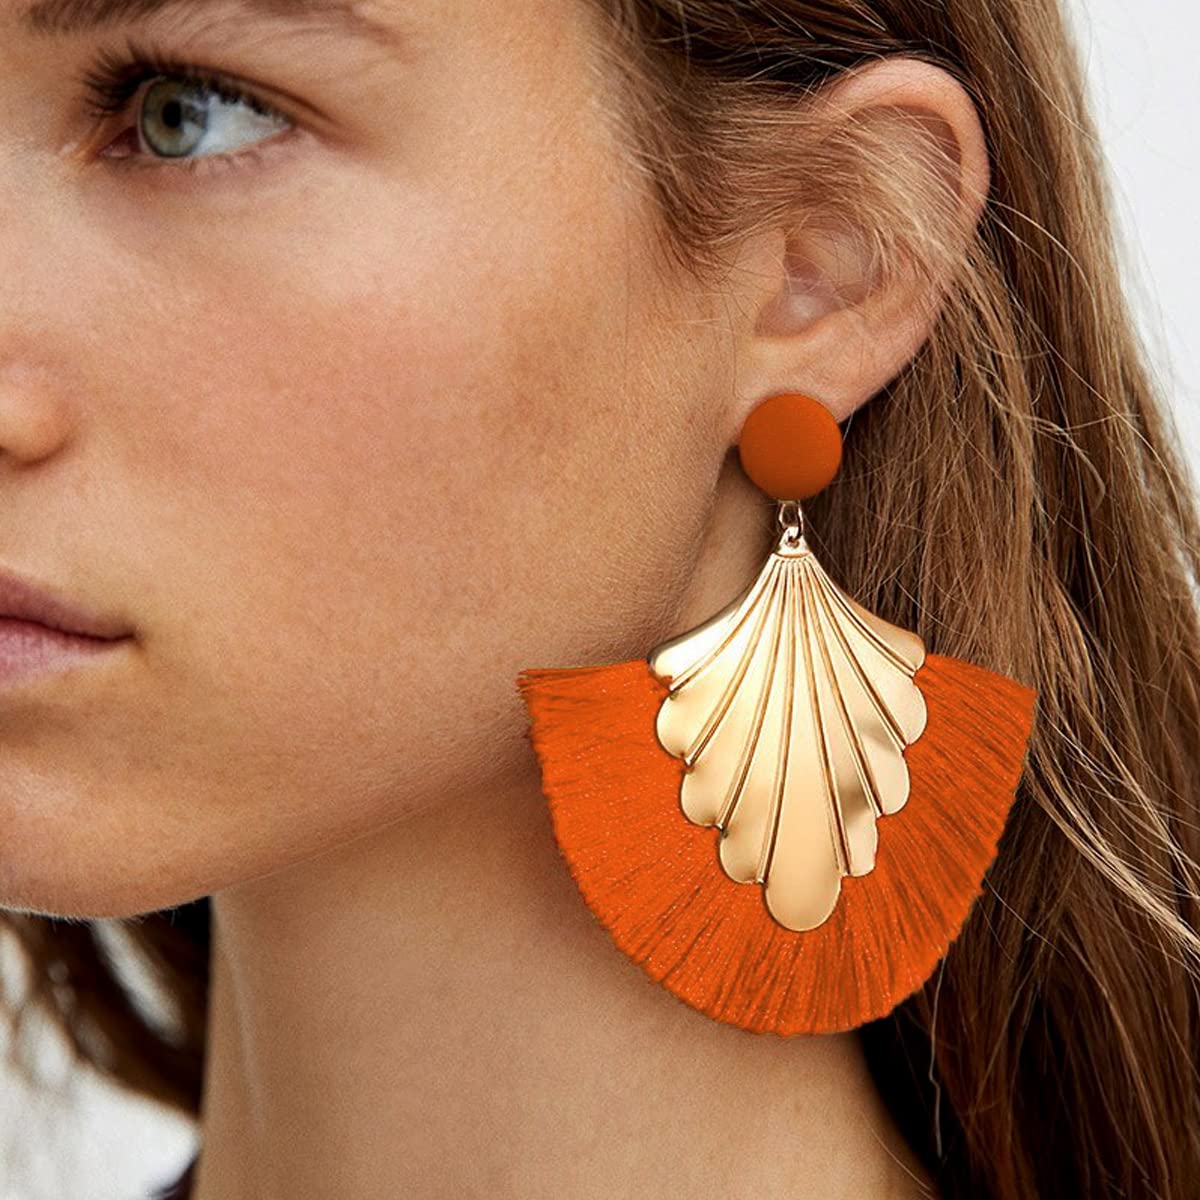 Apara Dangling Latest Orange and White colour With pearl drop Ring Jhumka  Earrings | Apara Fashions - For who you are | Fashion Jewelry for the  discerning.